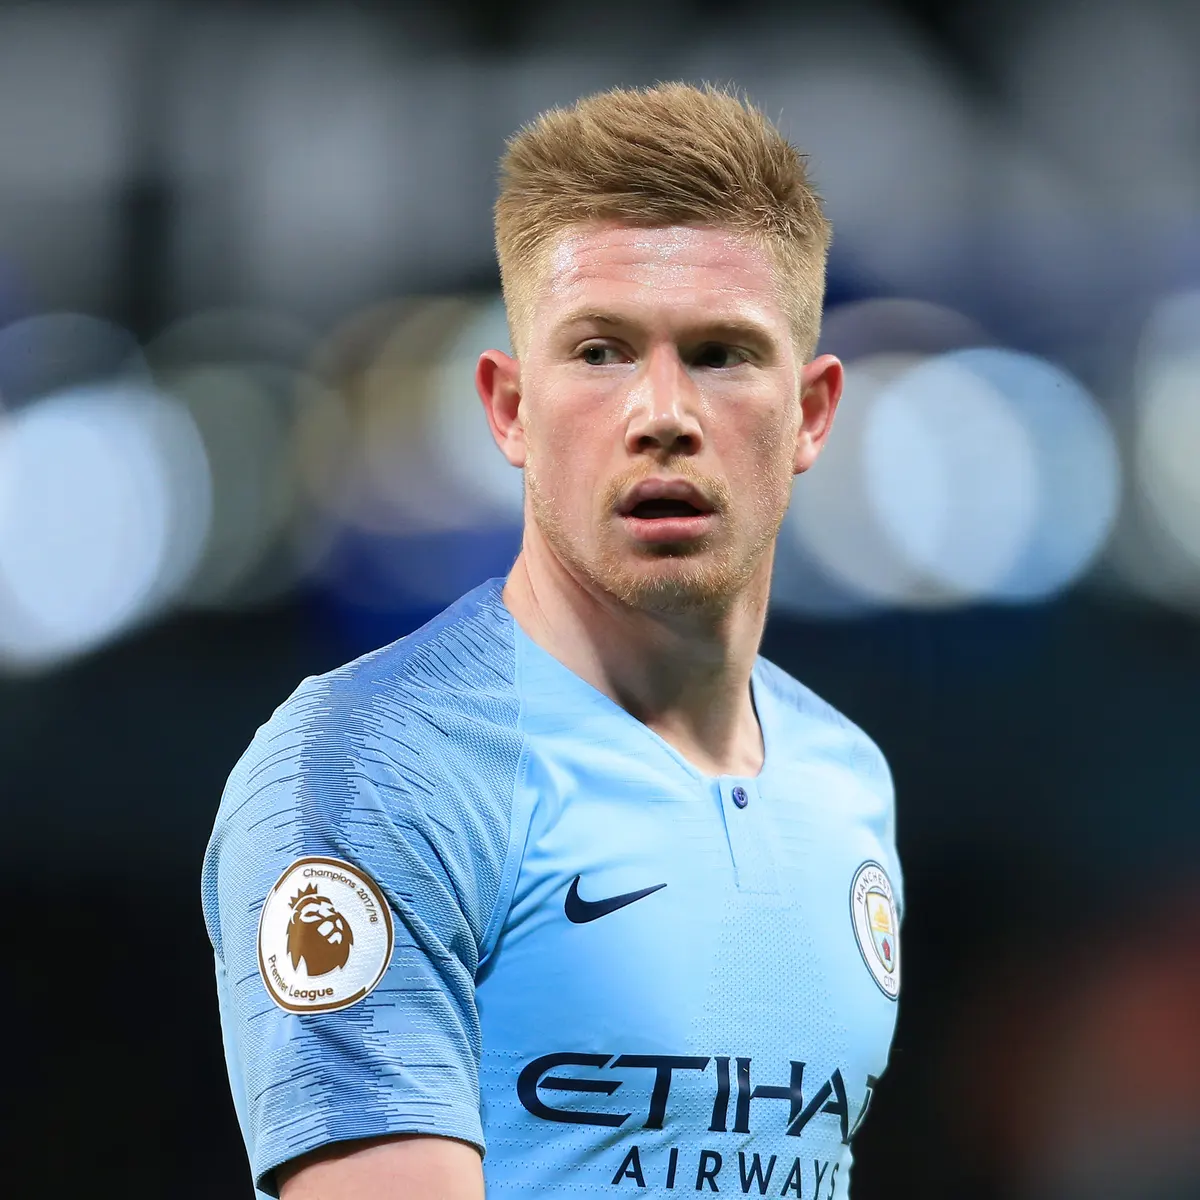 De Bruyne - Kevin De Bruyne FAQs 2021- Facts, Rumors and the latest